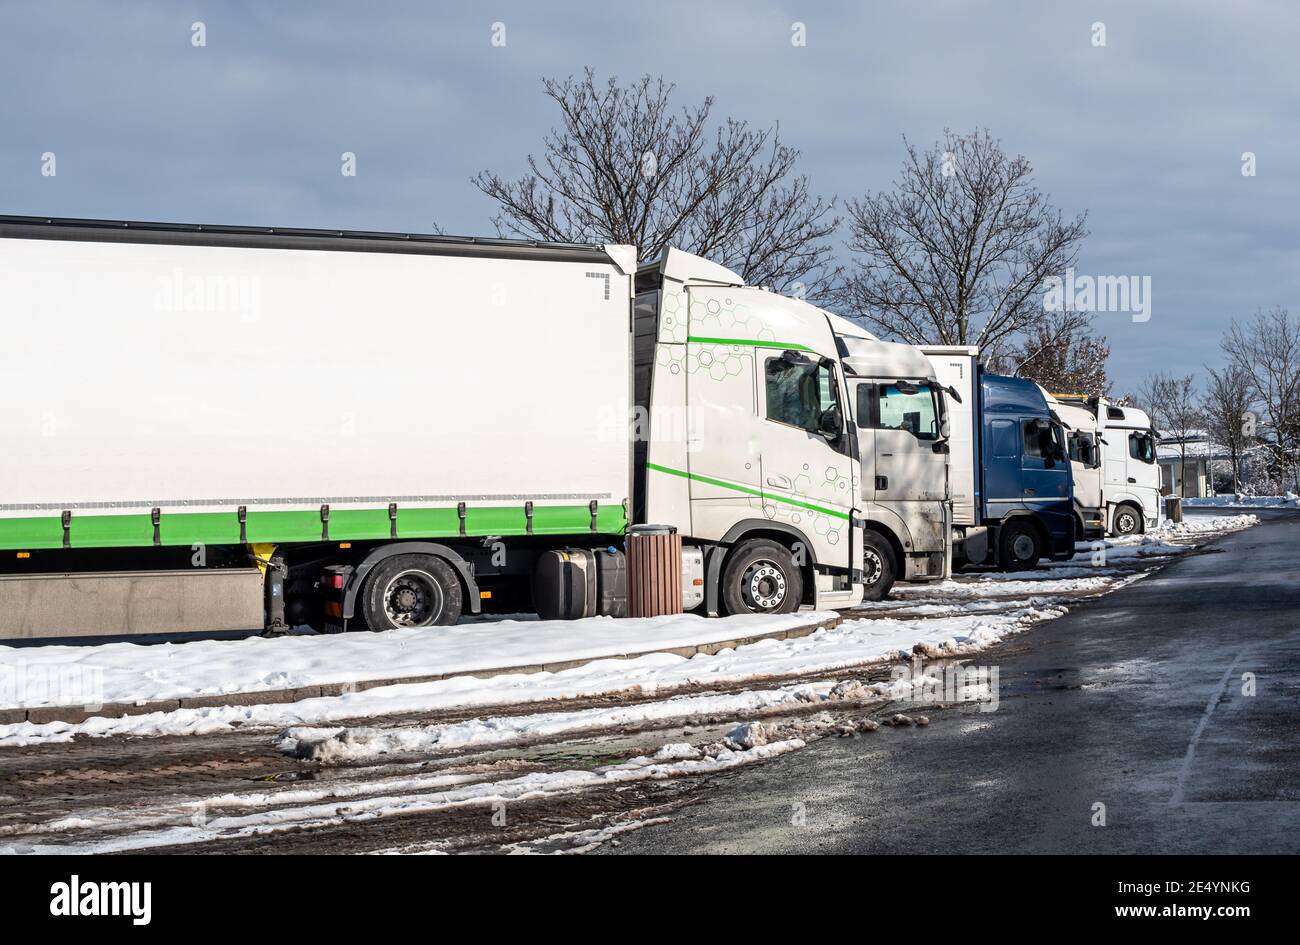 Trucks in winter at a rest area on the highway Stock Photo